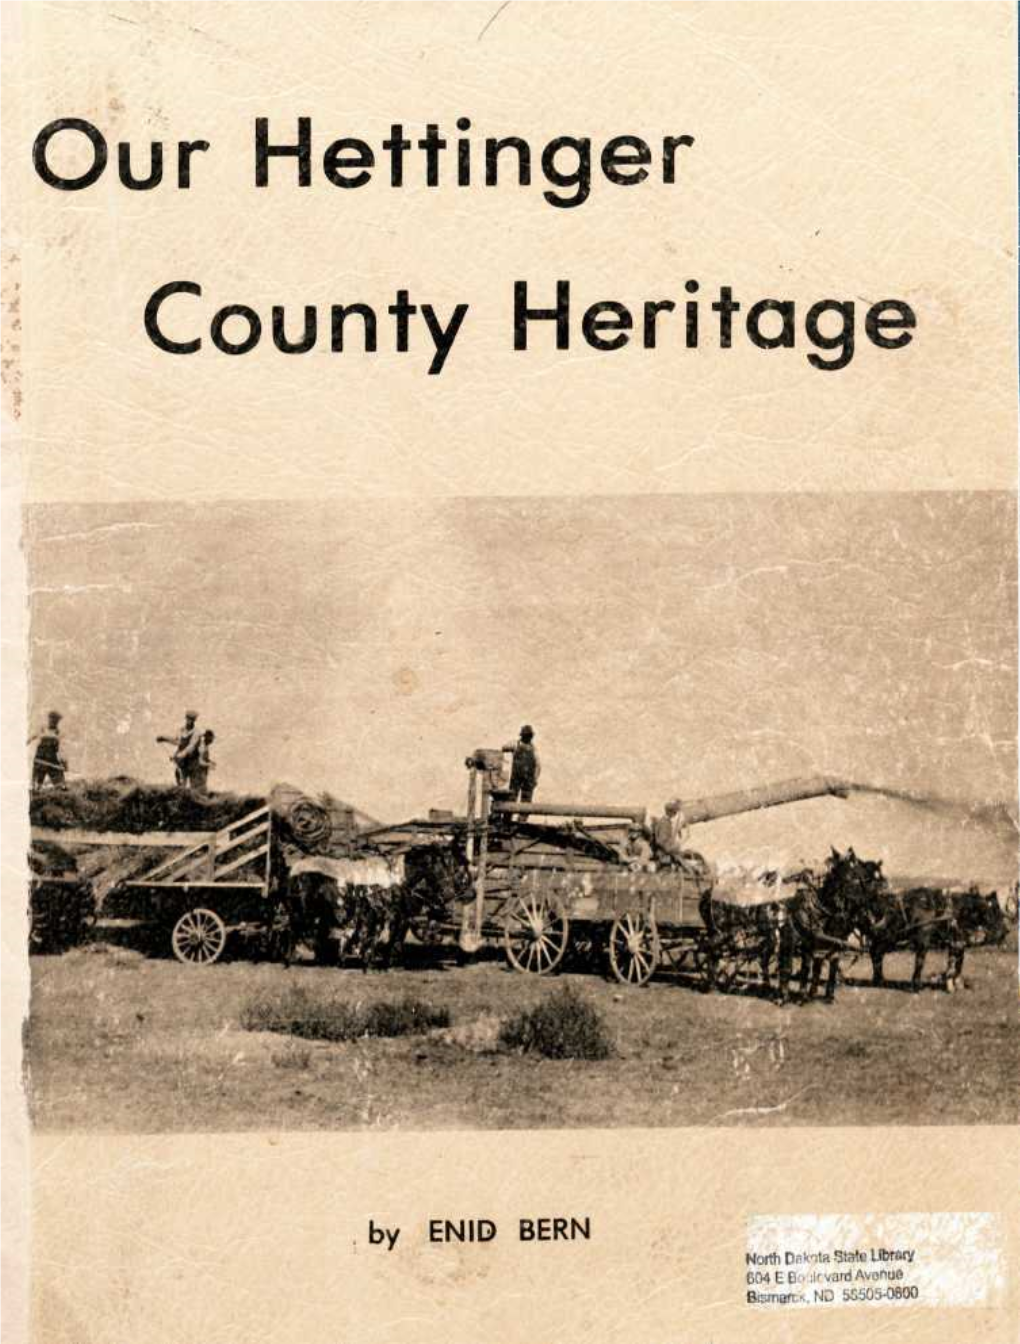 Our Hettinger County Heritage